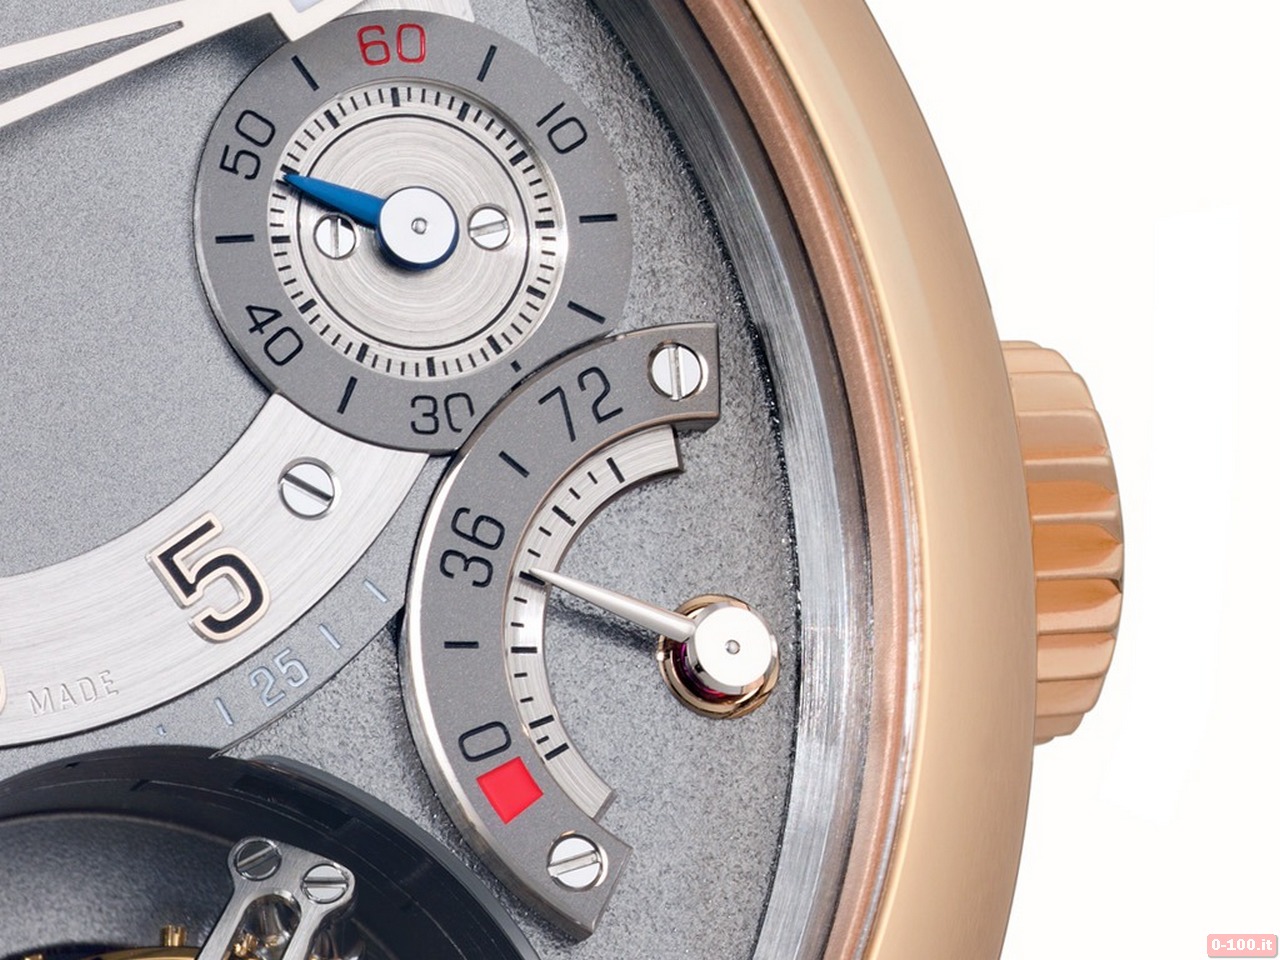 0-100.IT | Greubel Forsey GMT Oro Rosso